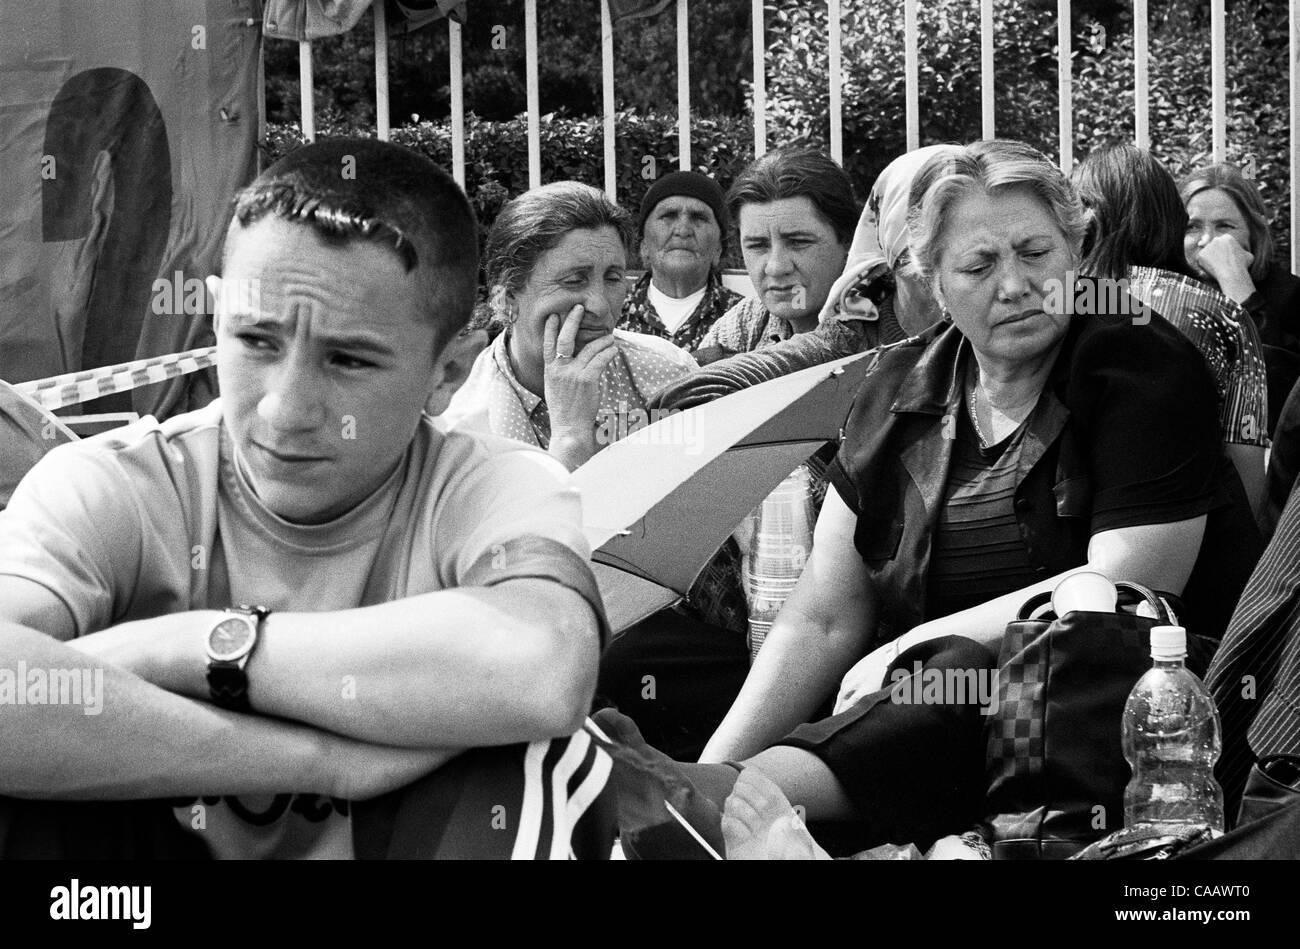 Albanian families of the missing sit in protest outside the parliament building in Pristina, Kosovo. They are upset with the lack of progress, and lack of communication with the investigators. Stock Photo